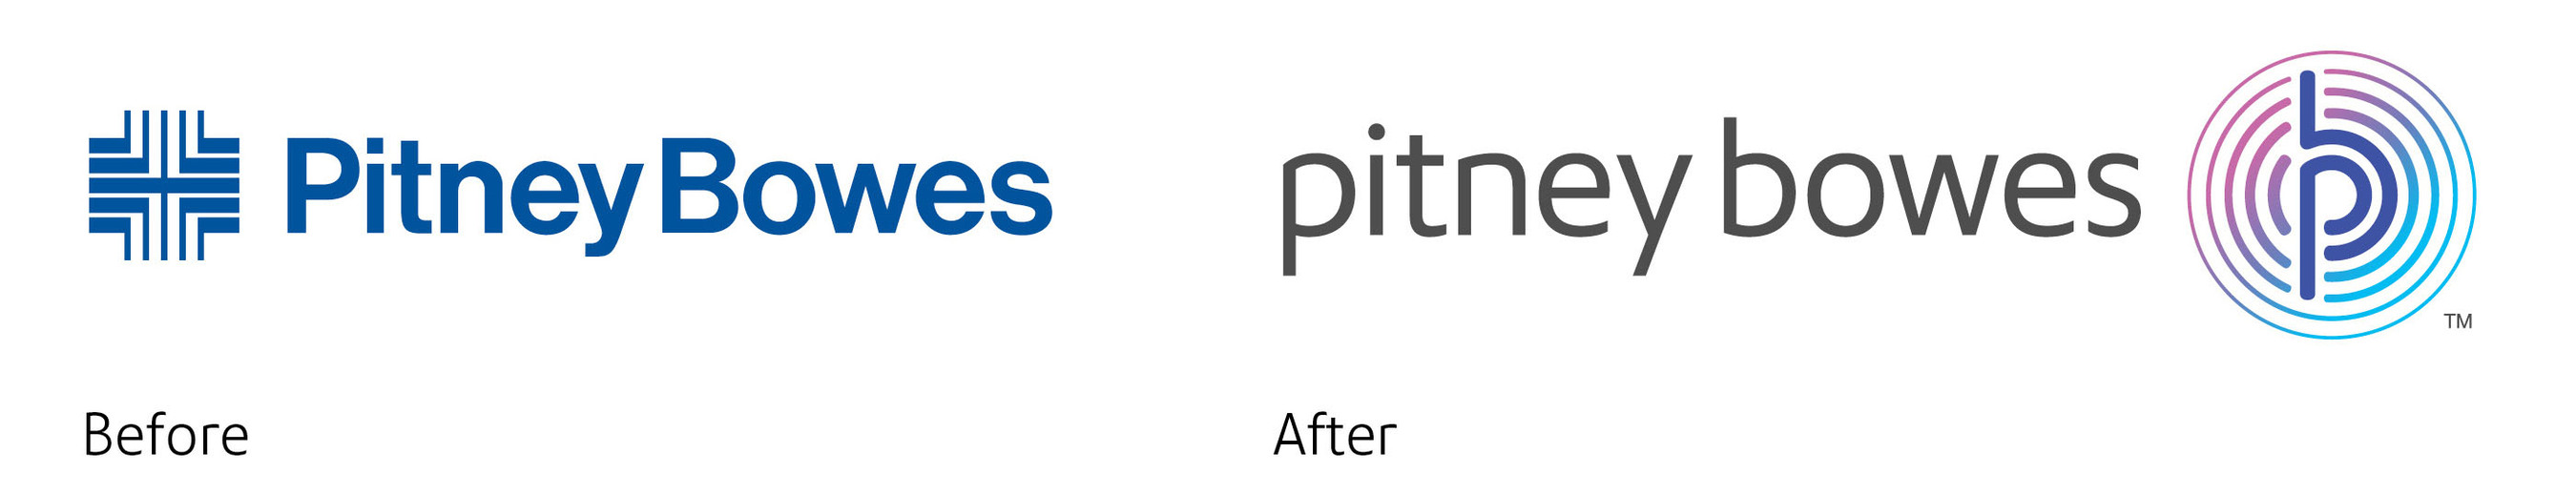 Pitney Bowes Logo: Before and After